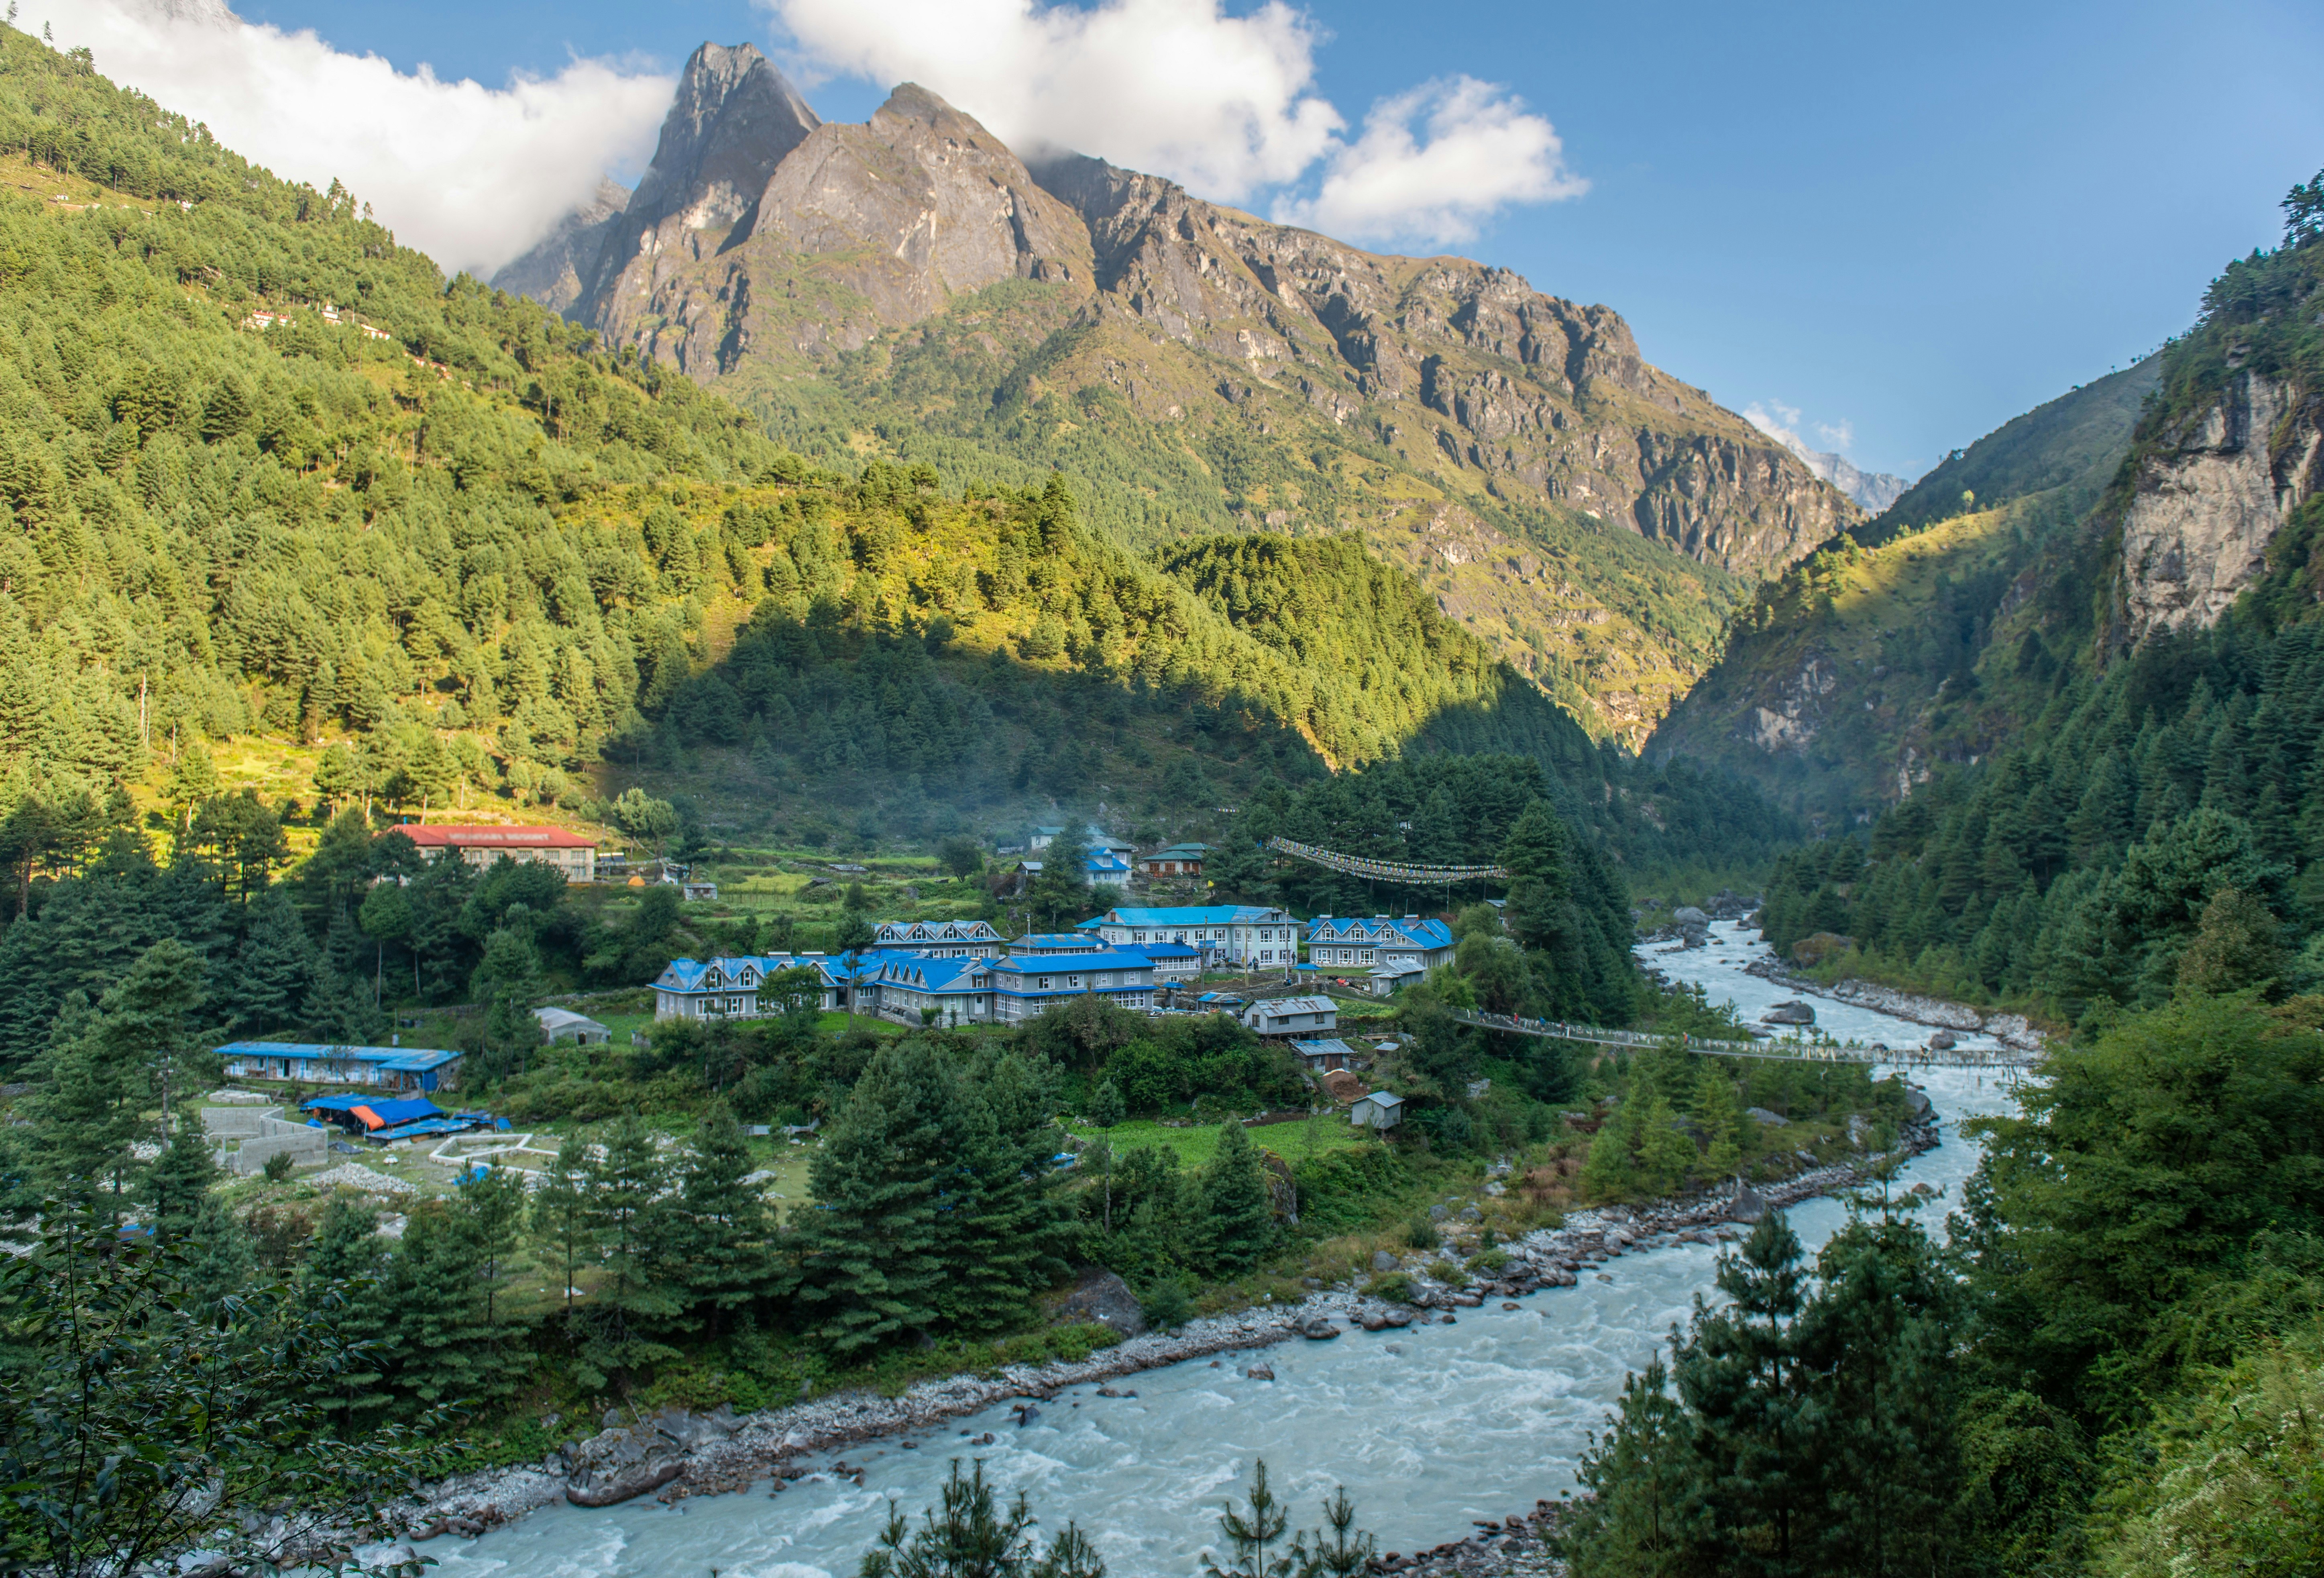 A cluster of blue-roofed buildings that make up the small town of Phakding, a stop on the trekking route to Everest Base Camp. A lovely blue river sweeps around the town, while the surrounding hills are covered in forest.